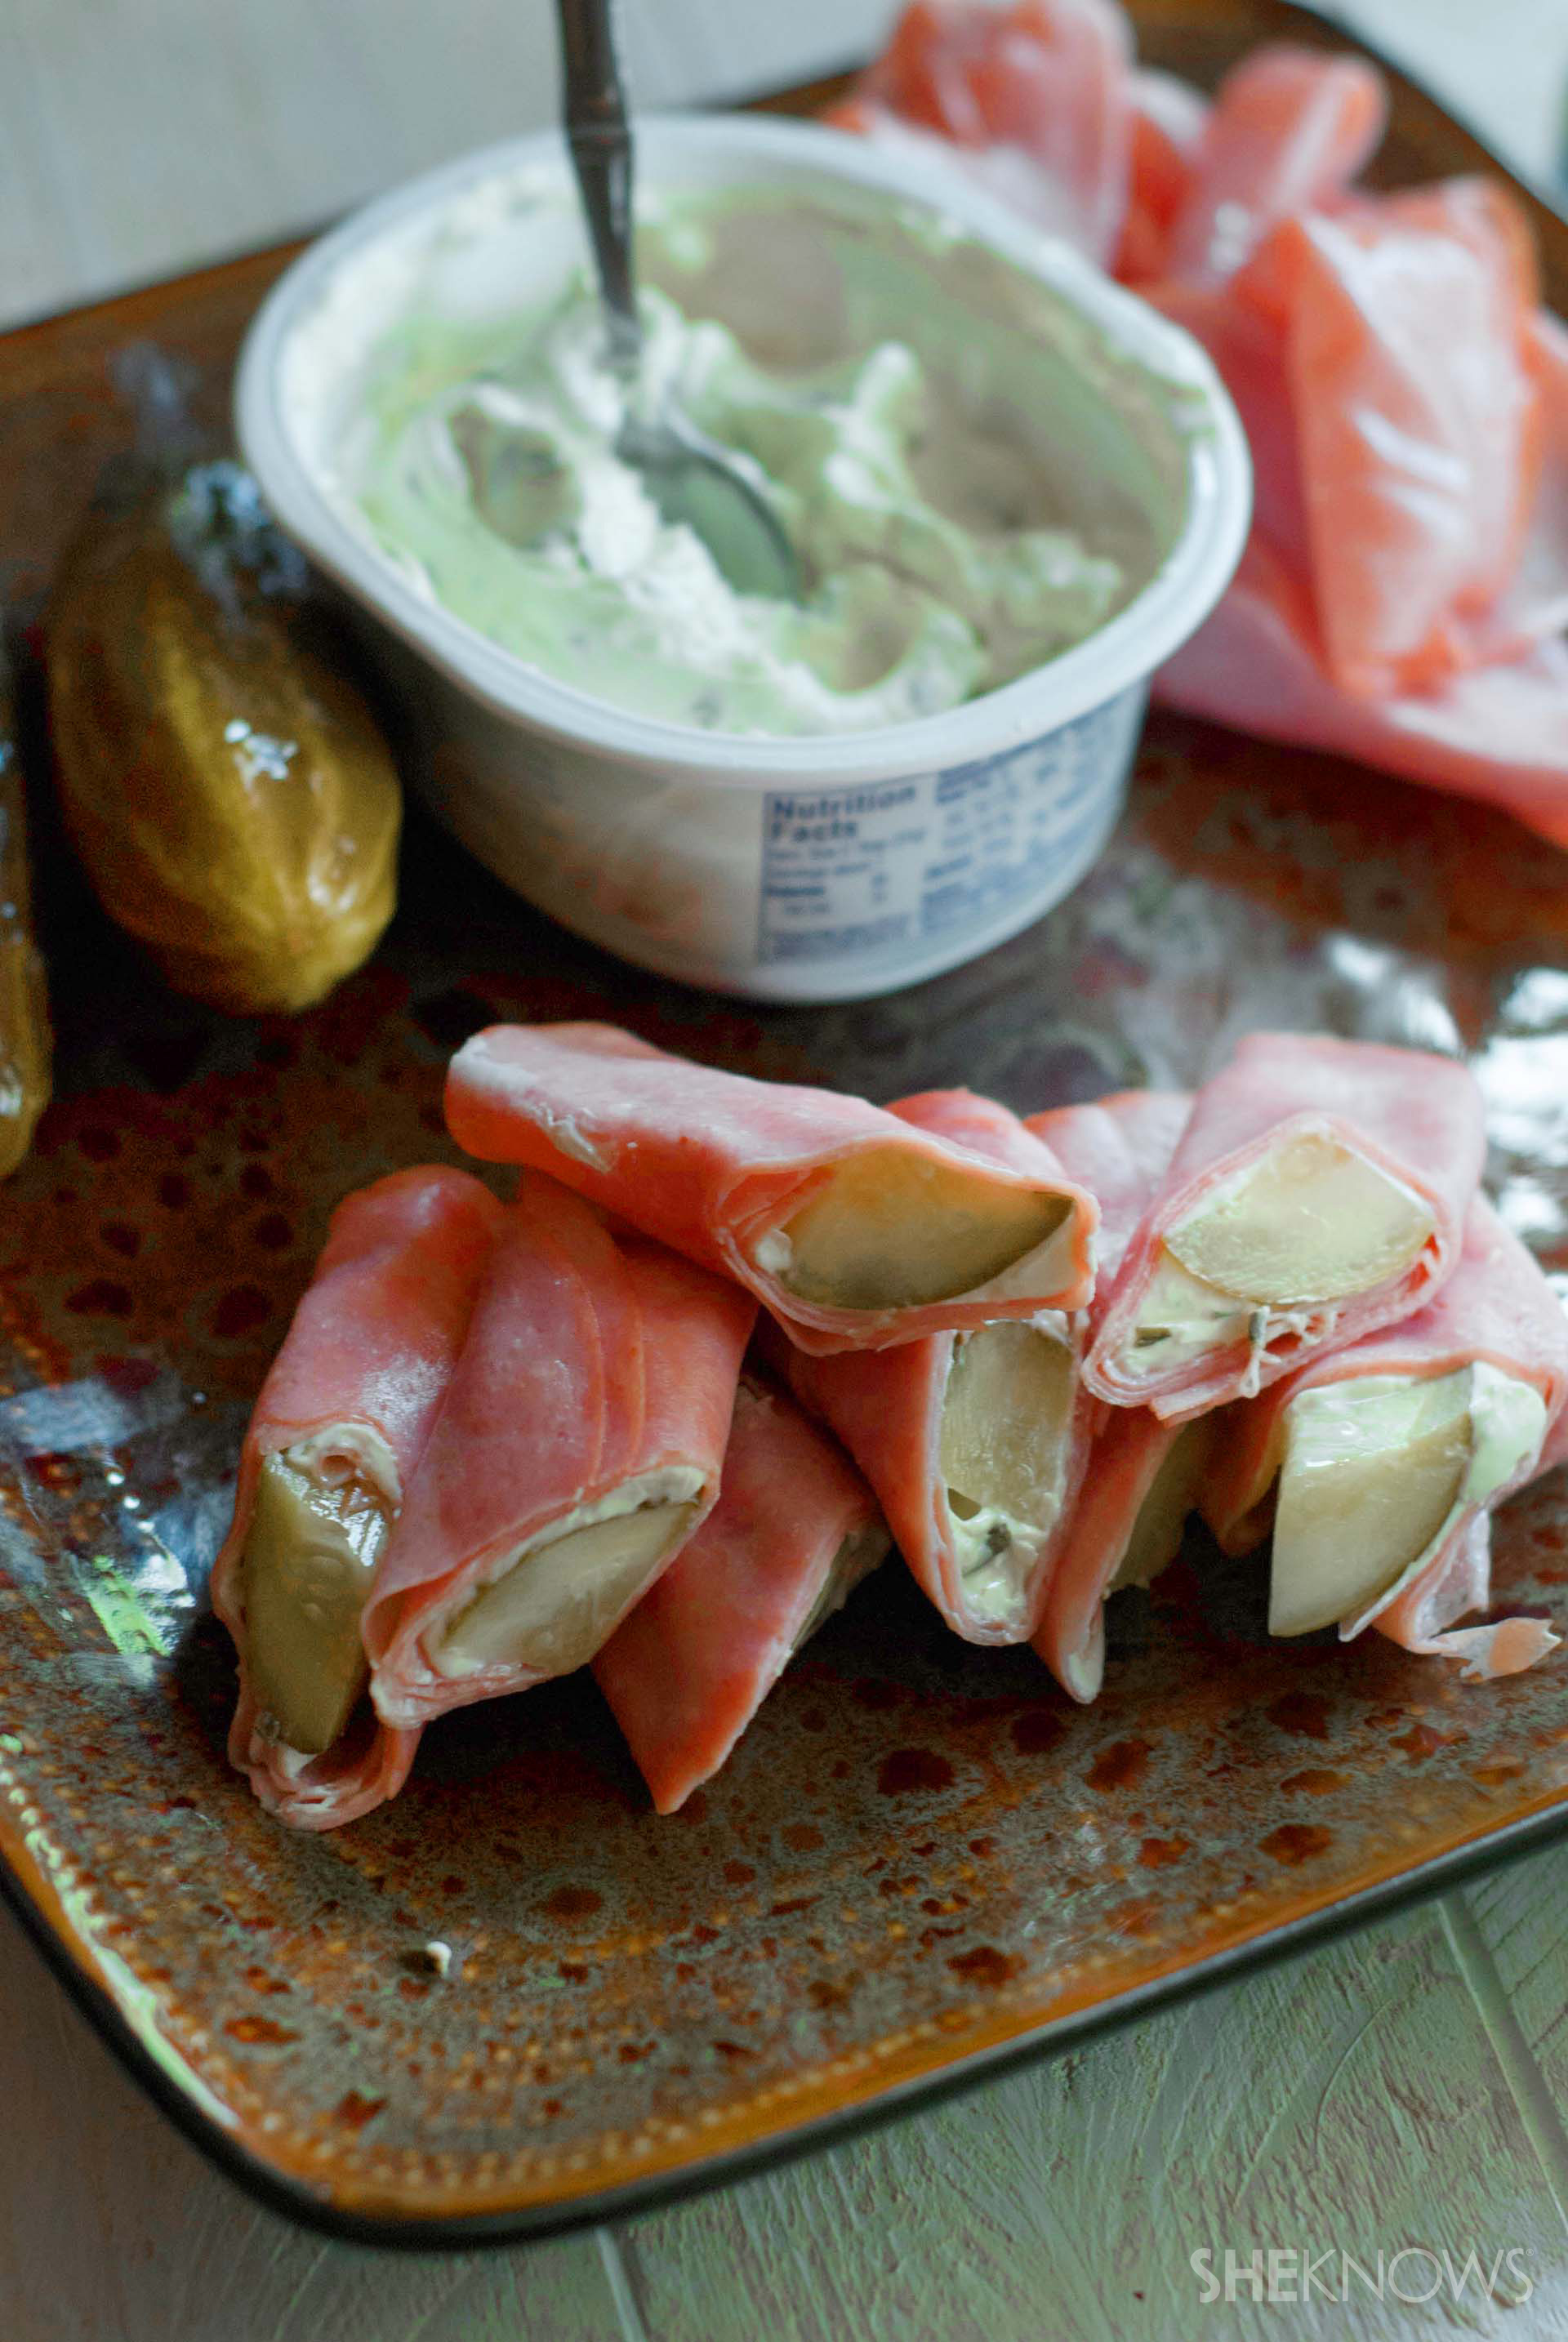 2-Minute dill pickle roll-ups are a delicious quick snack